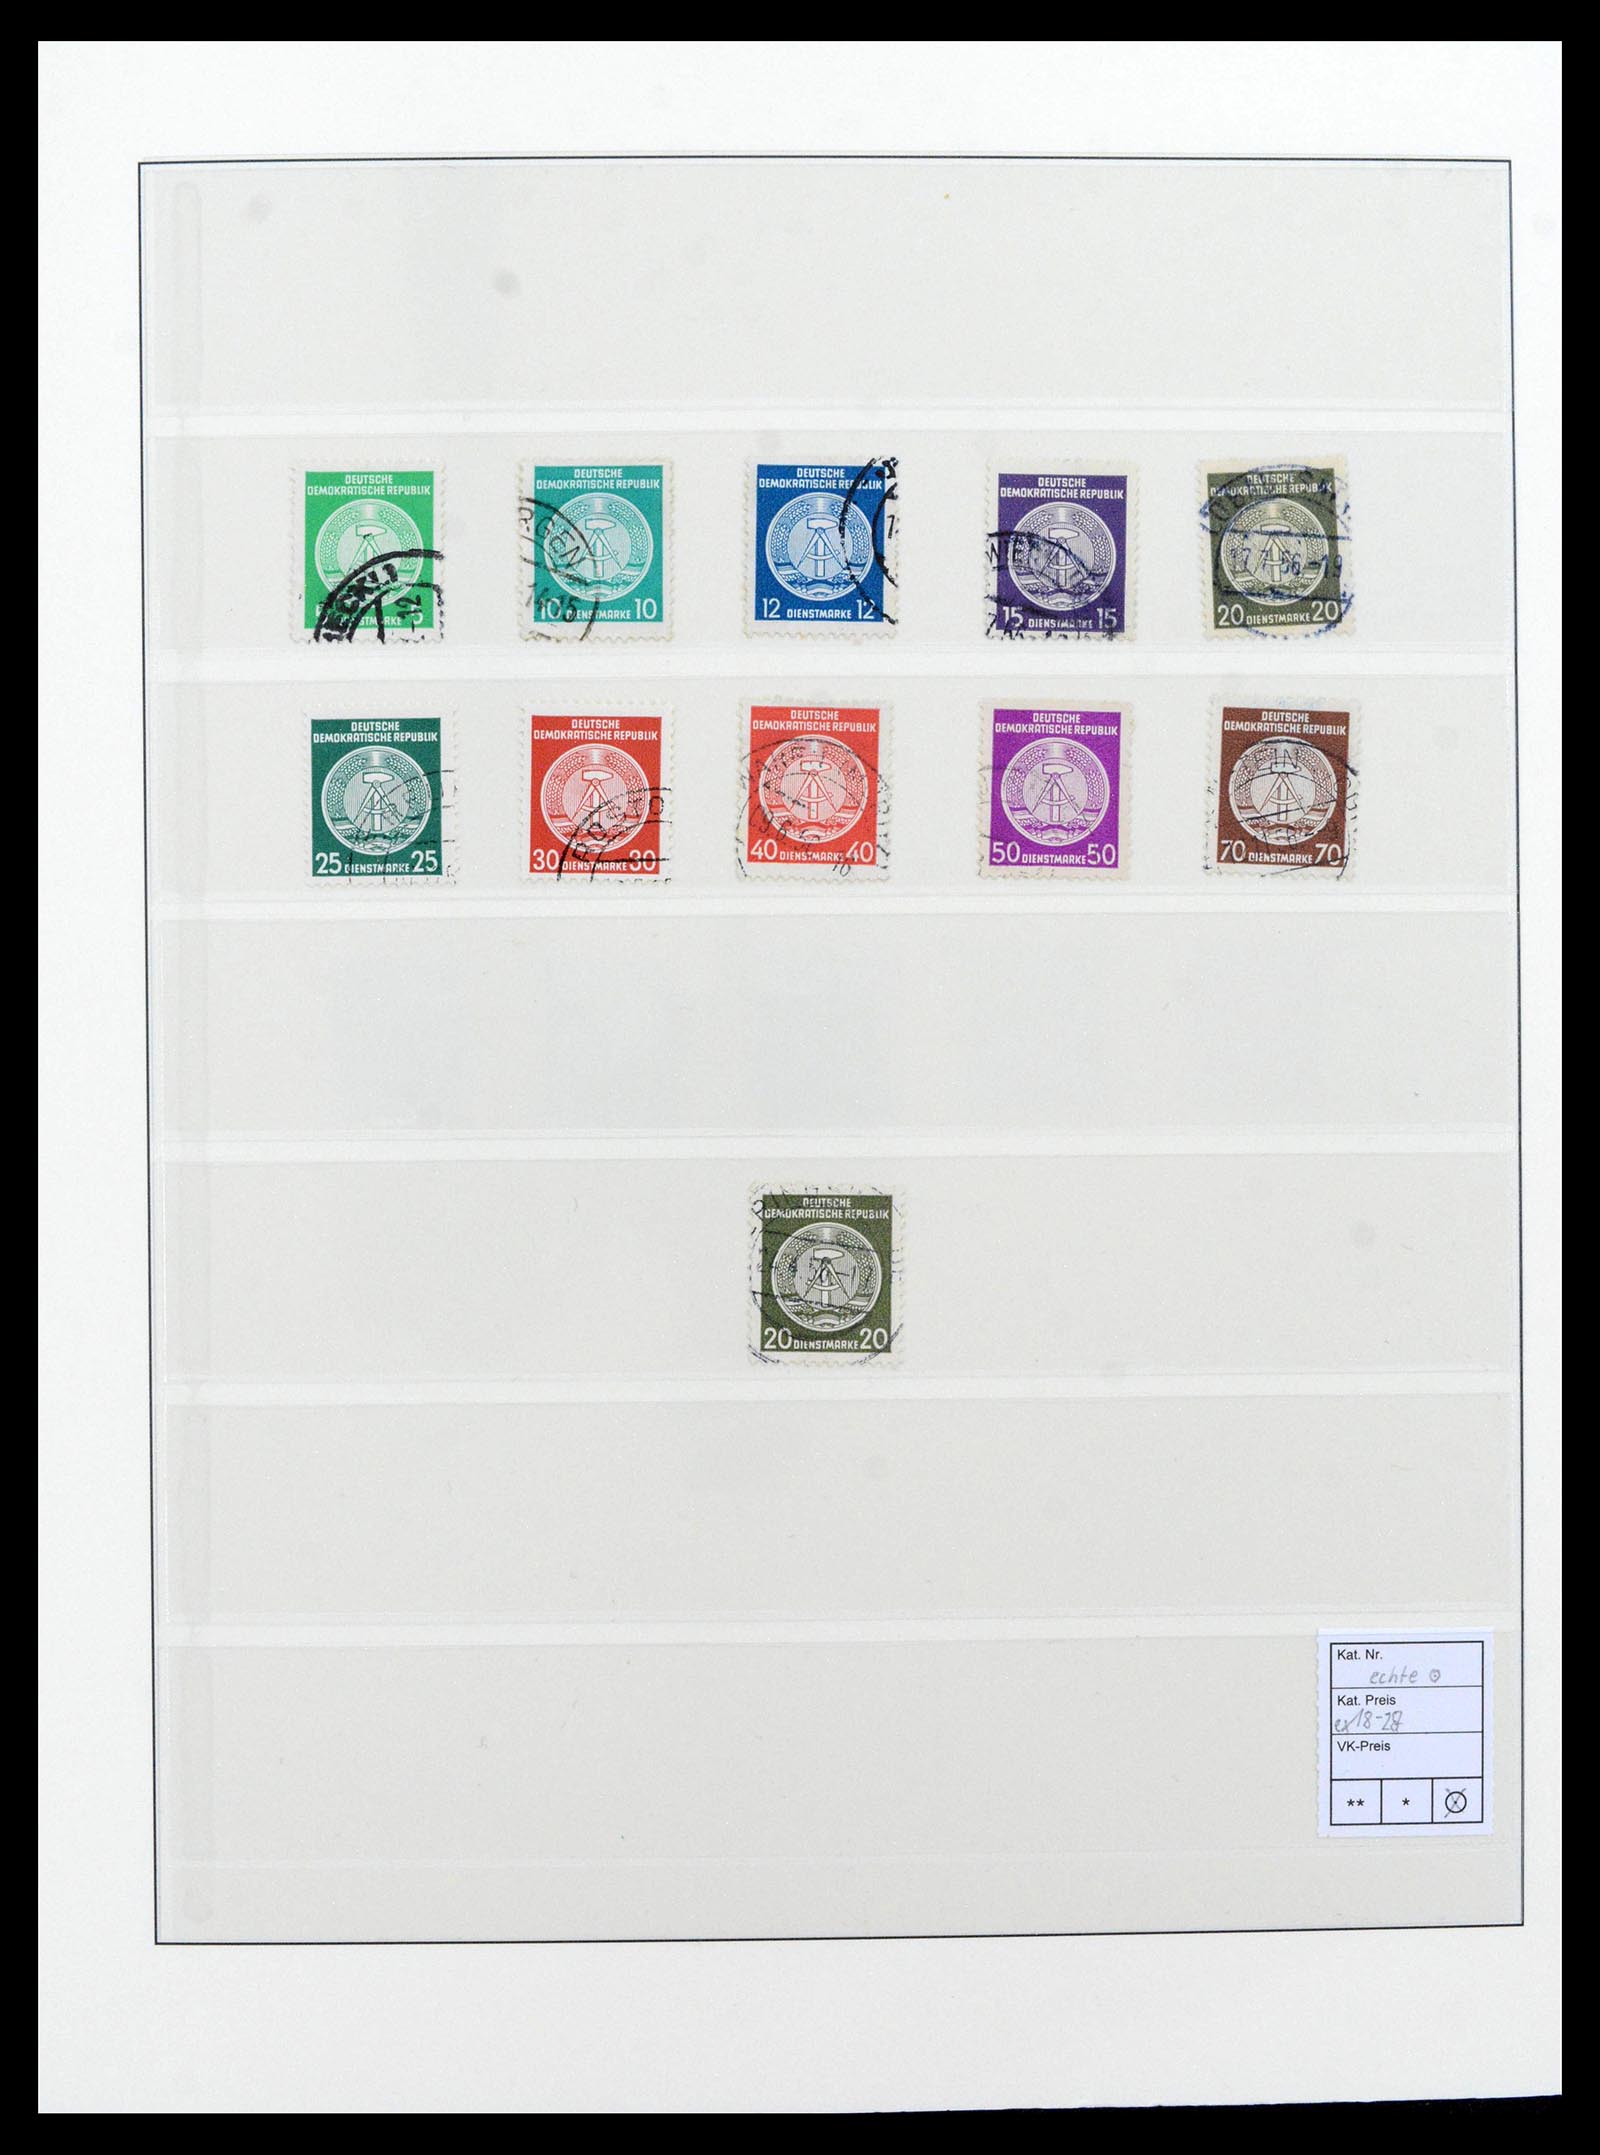 39376 0024 - Stamp collection 39376 GDR service stamps 1951-1965.